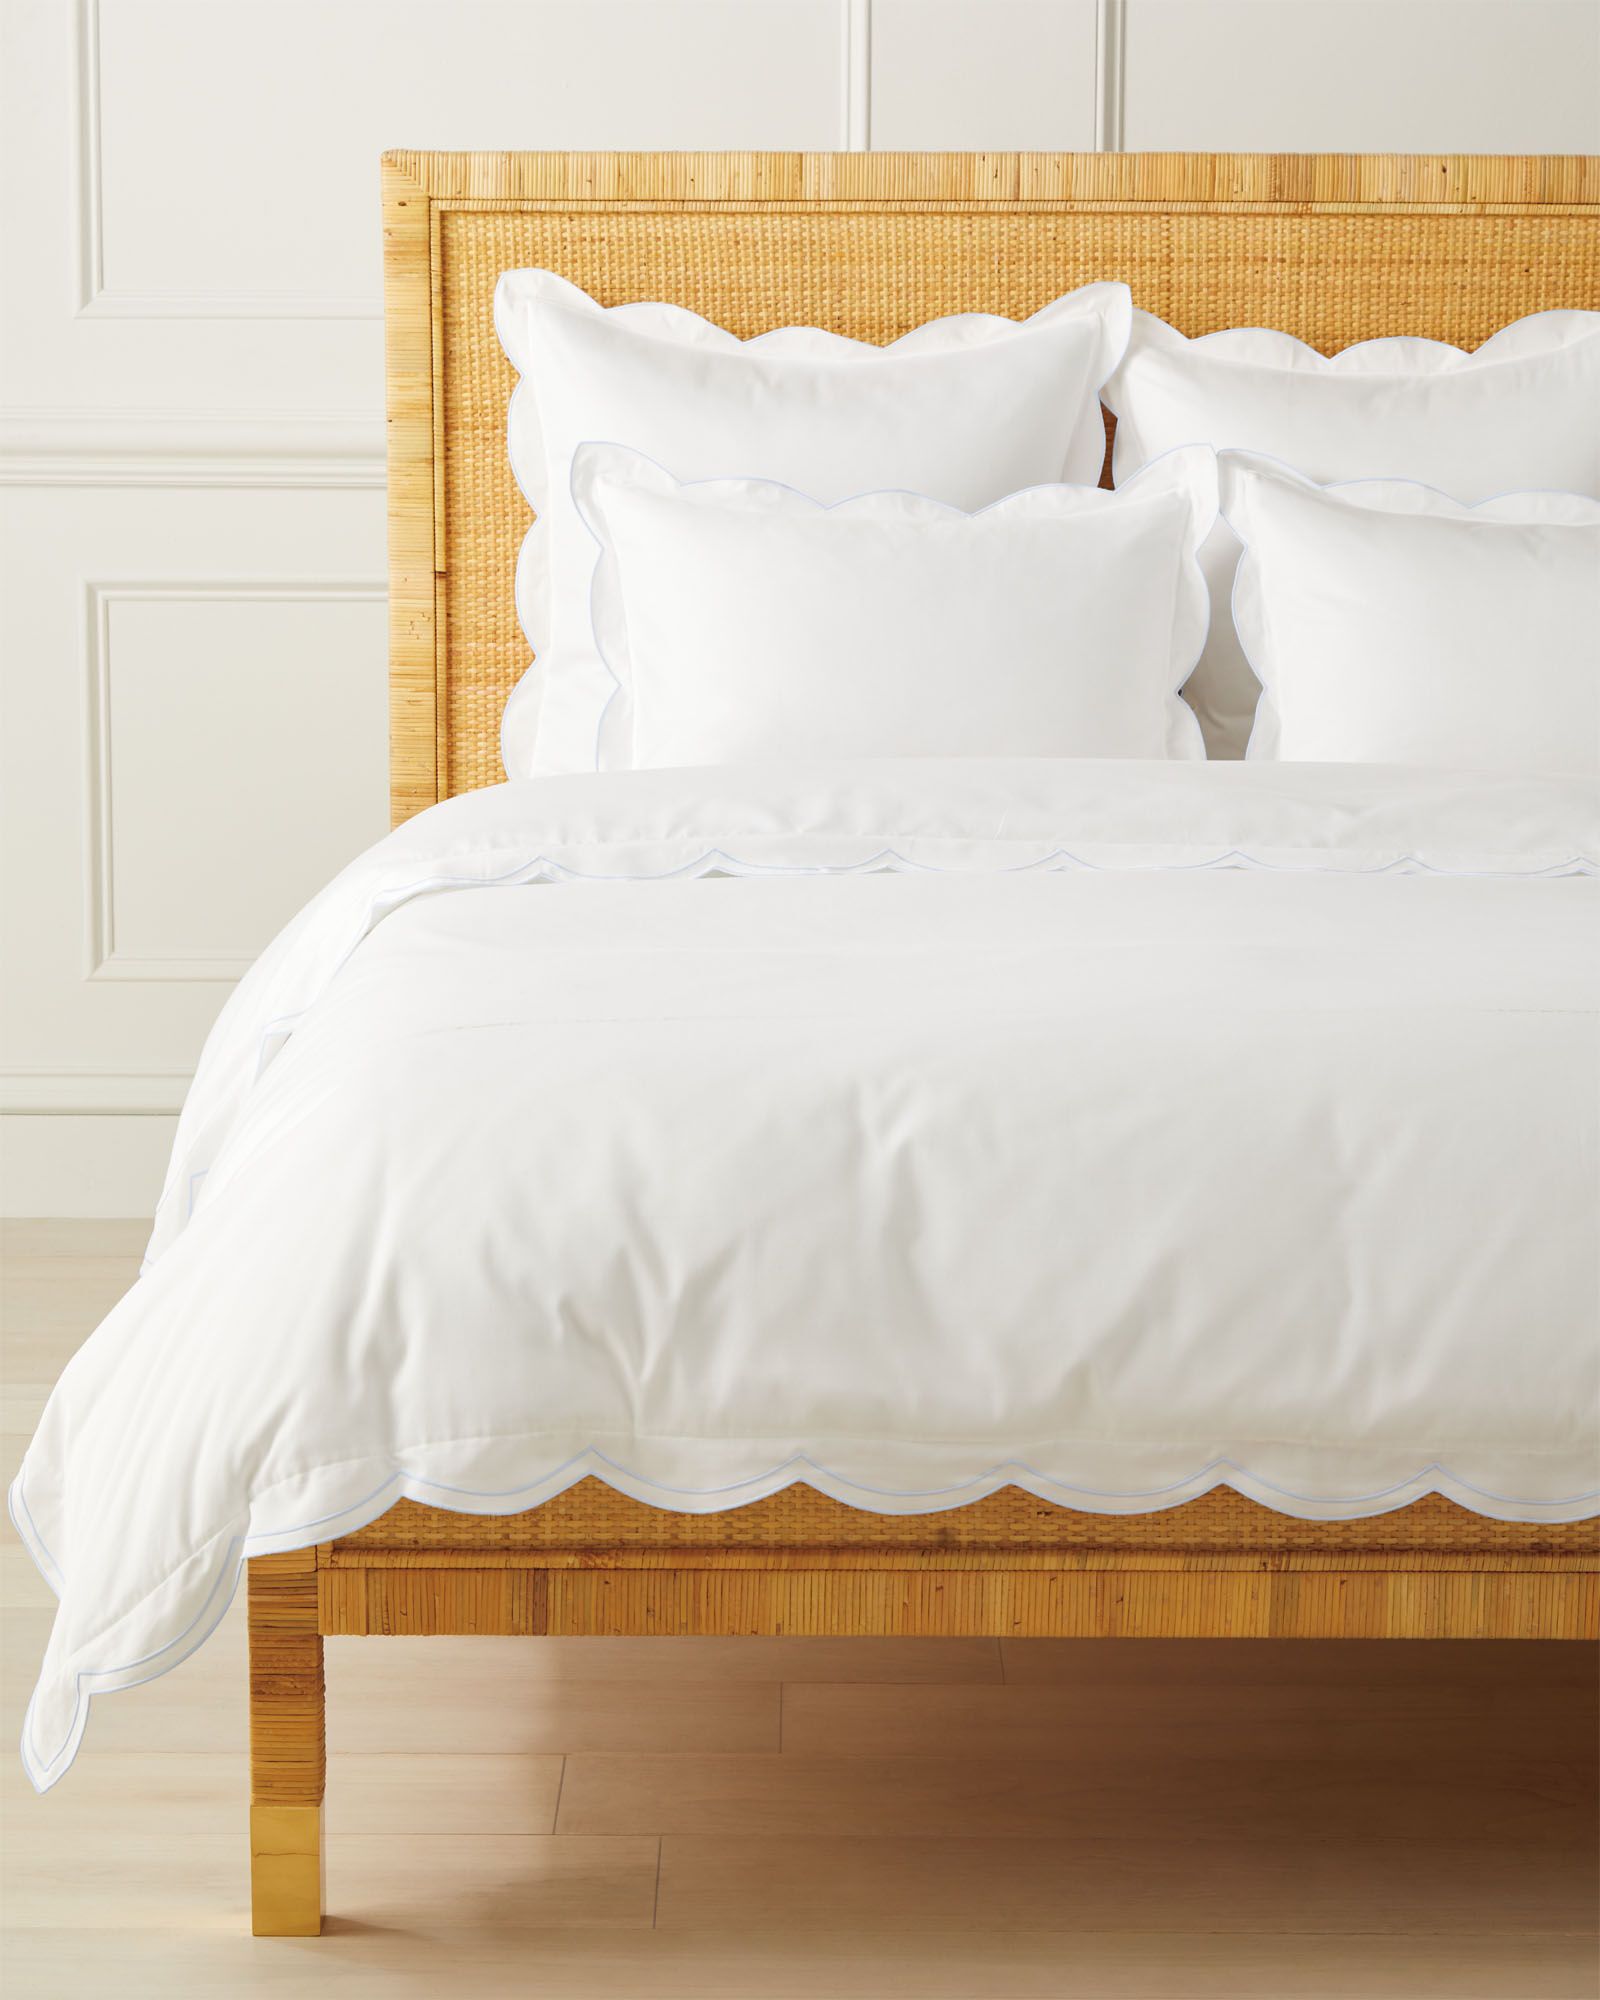 Scallop Duvet Cover | Serena and Lily